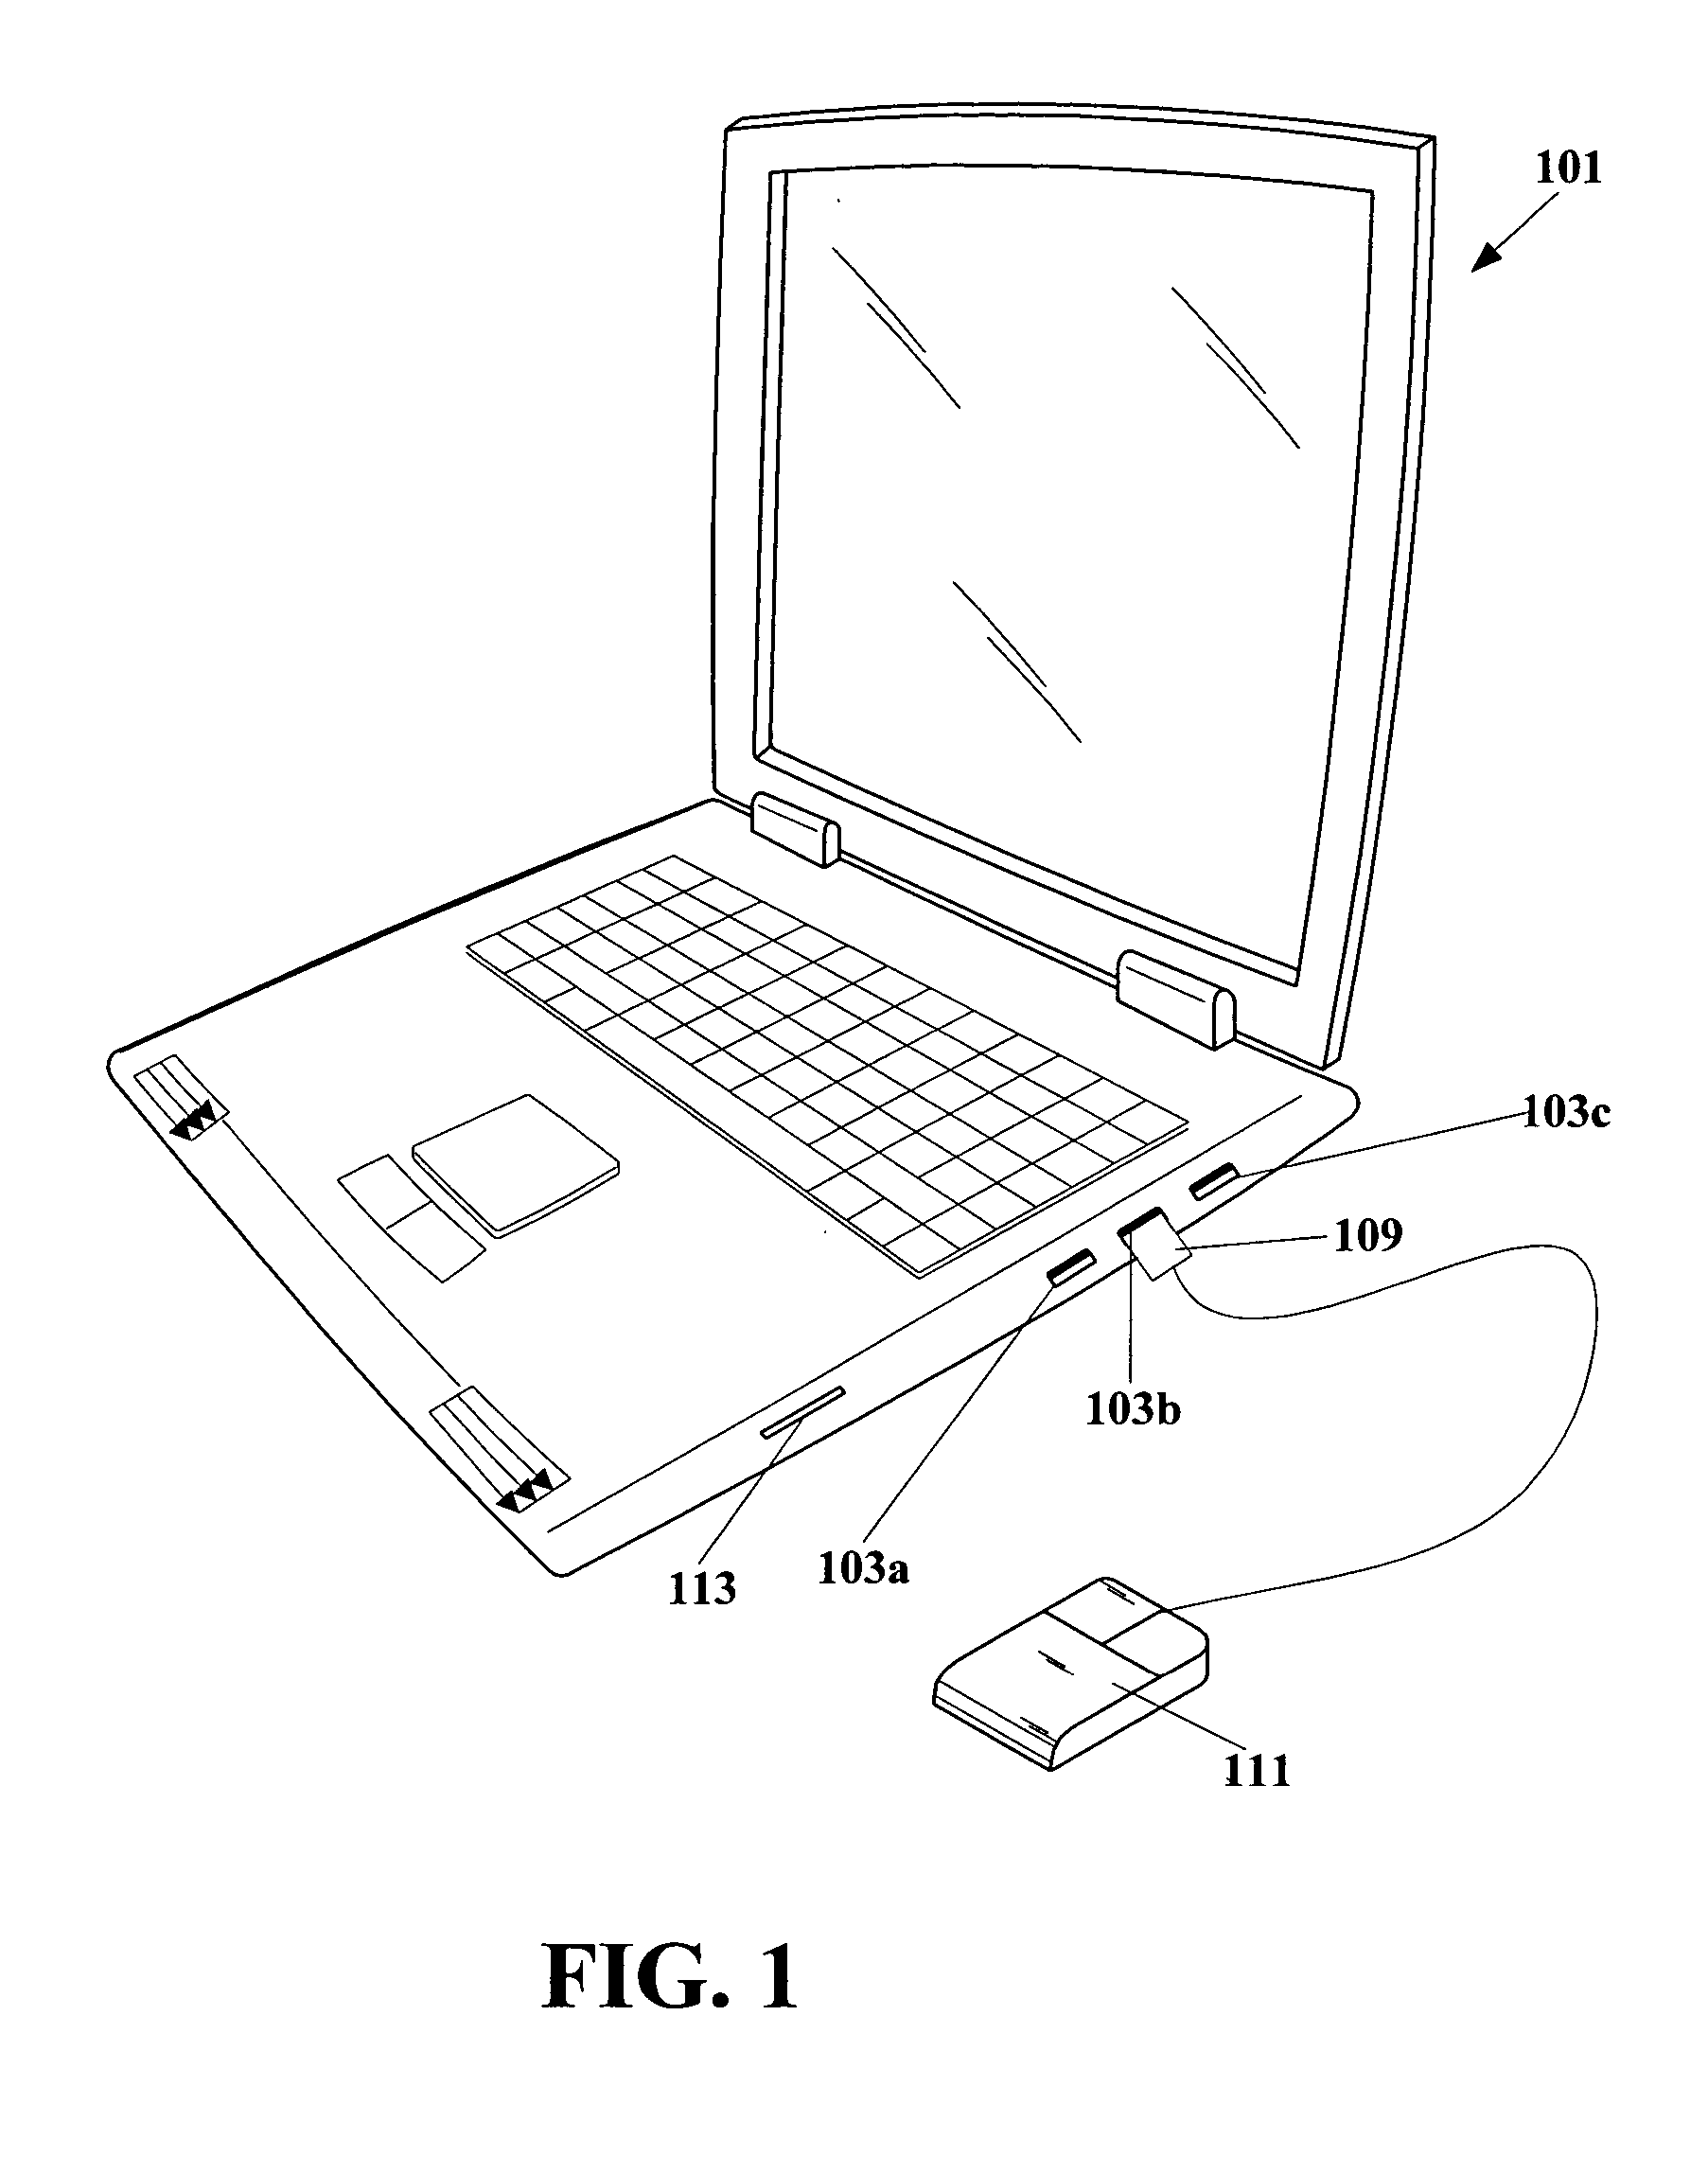 Peripheral device feature allowing processors to enter a low power state